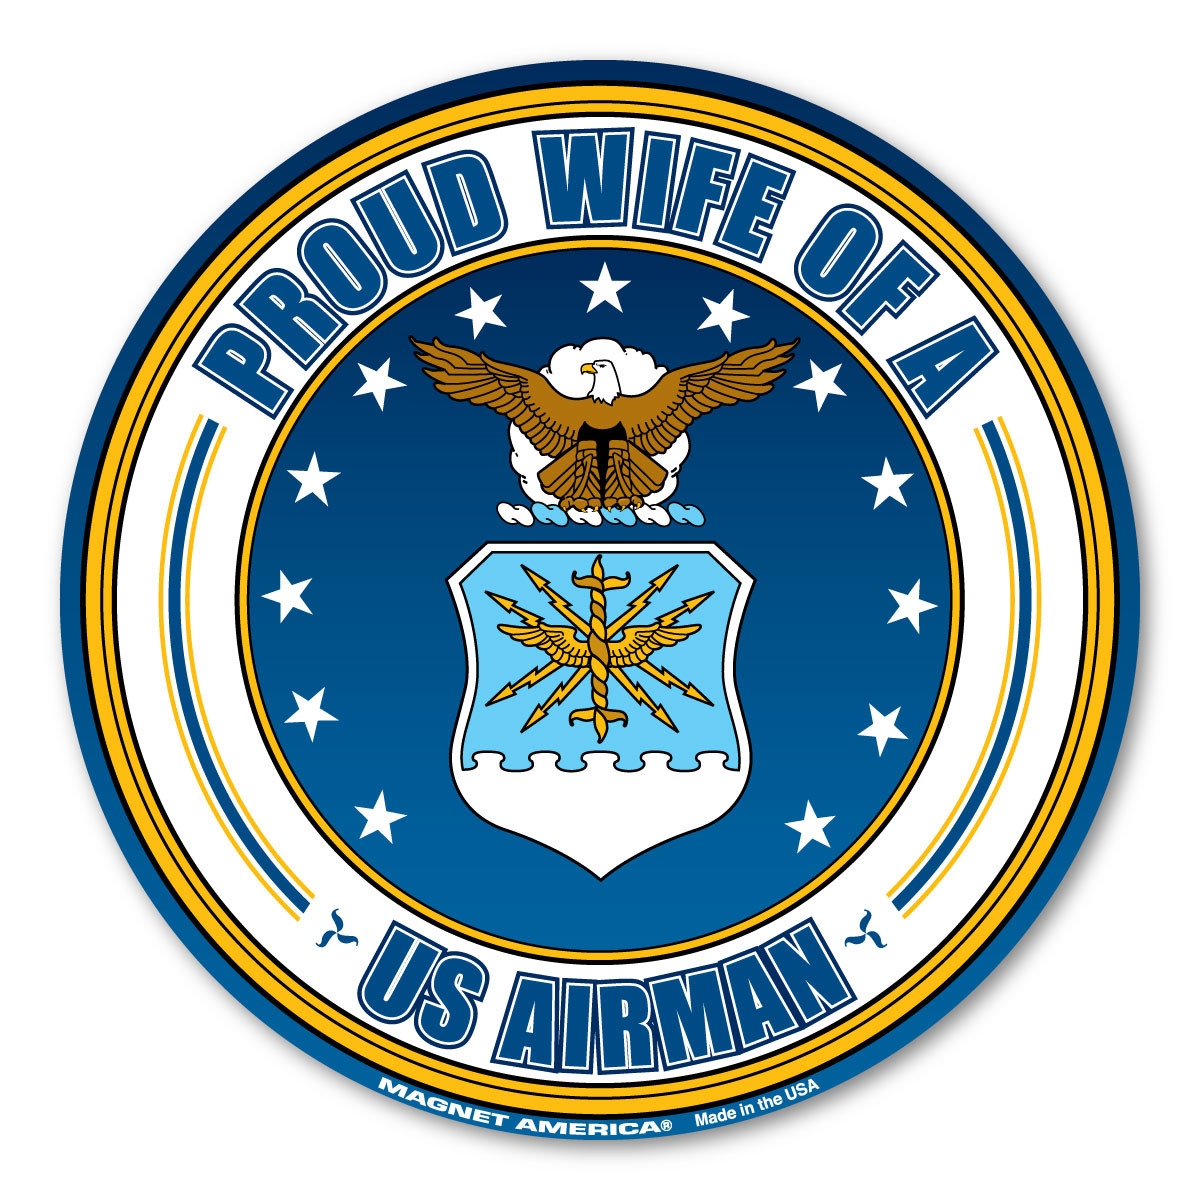 Proud Wife of a US Airman Circle  Magnet